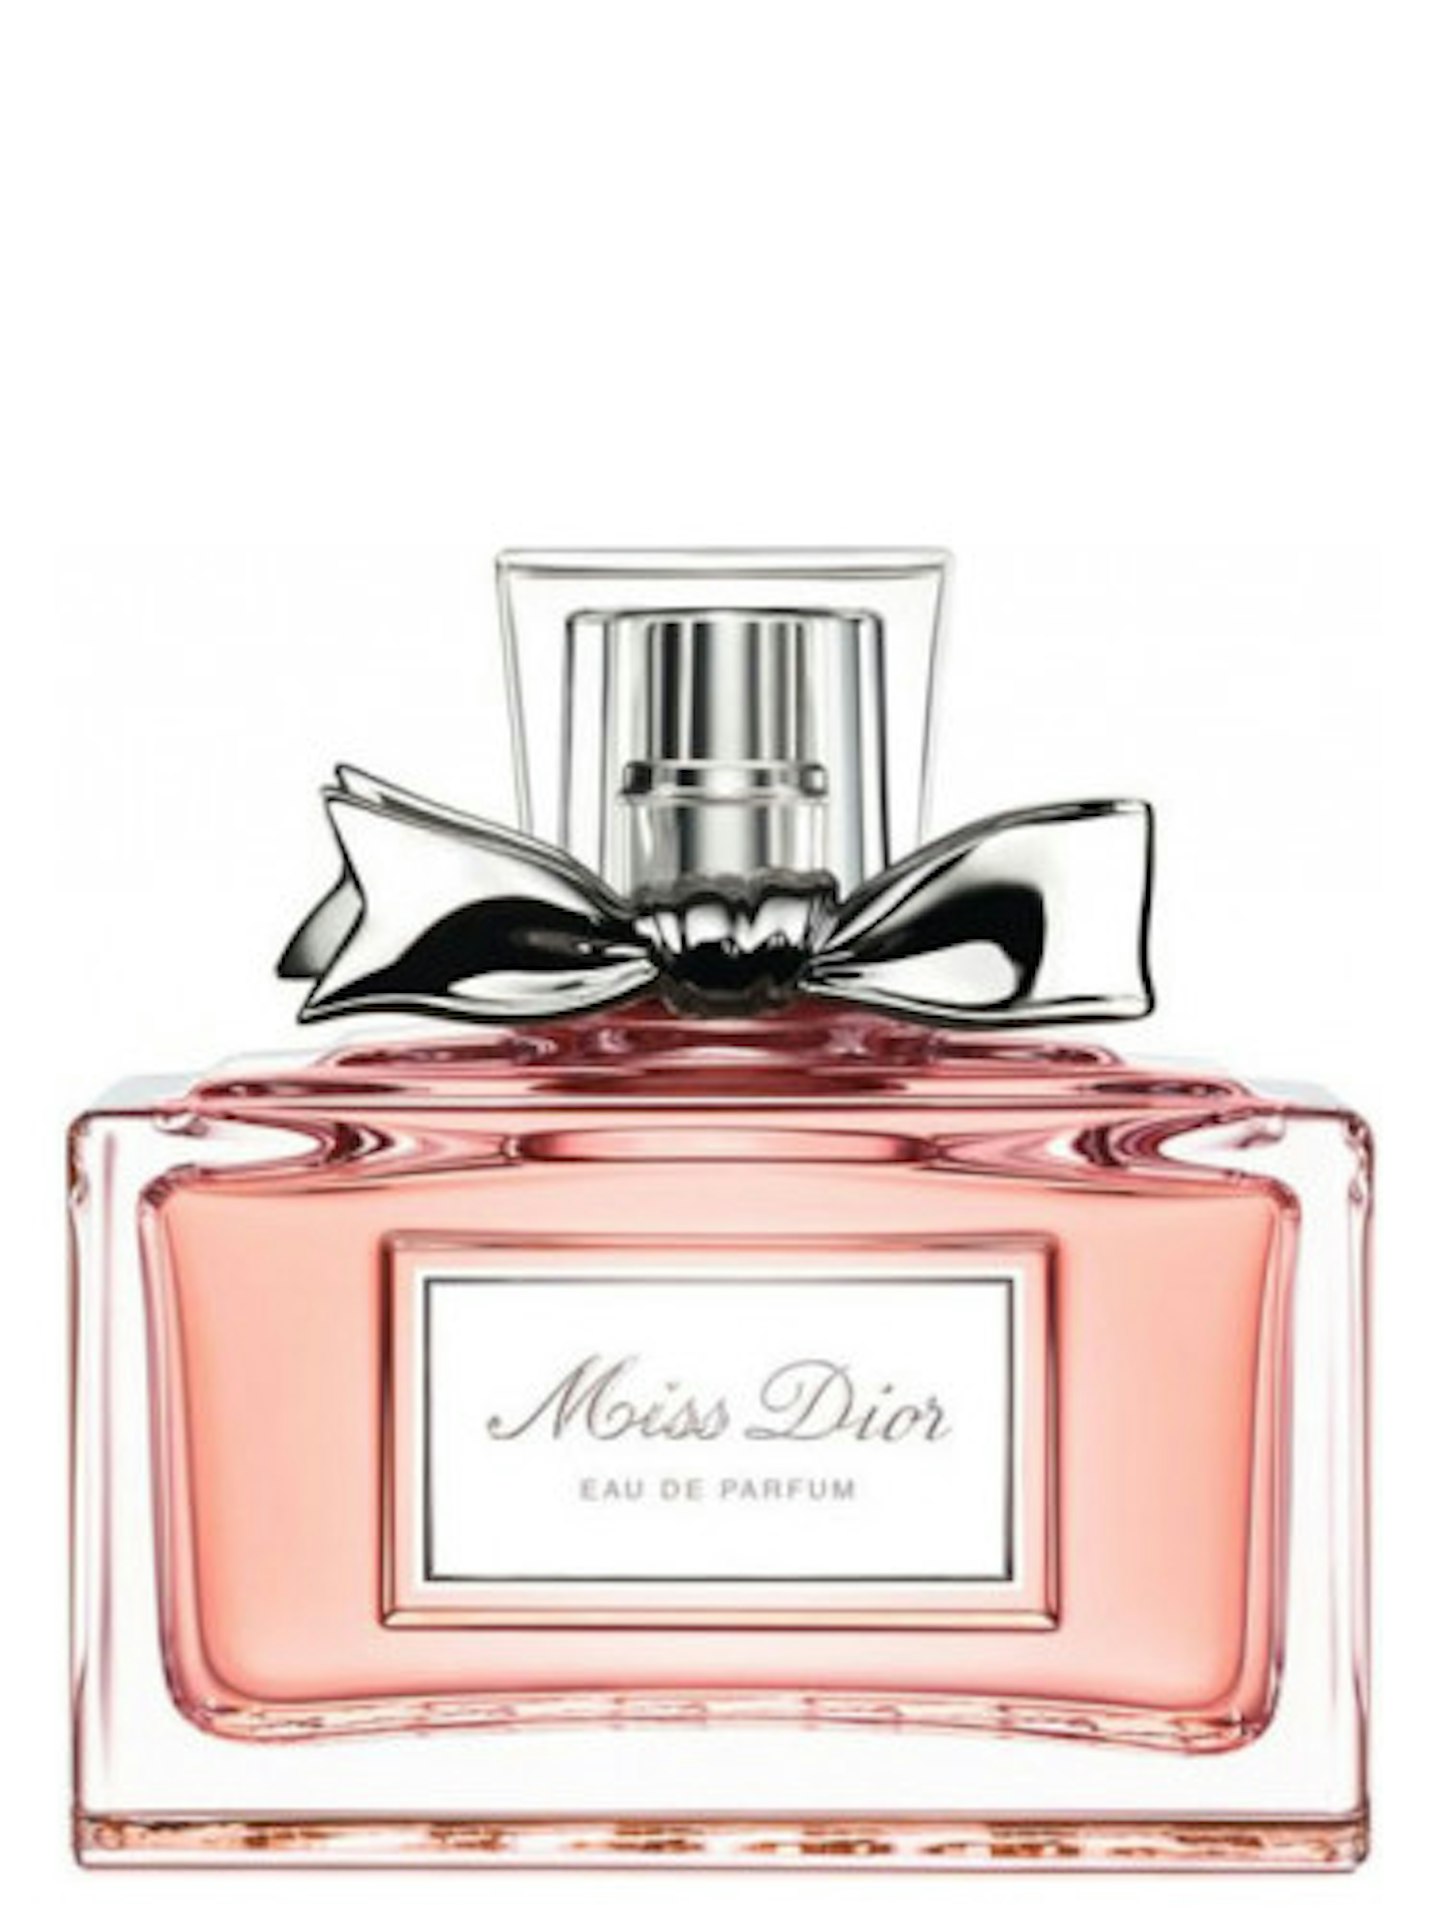 Miss Dior EDP, £112 for 100ml